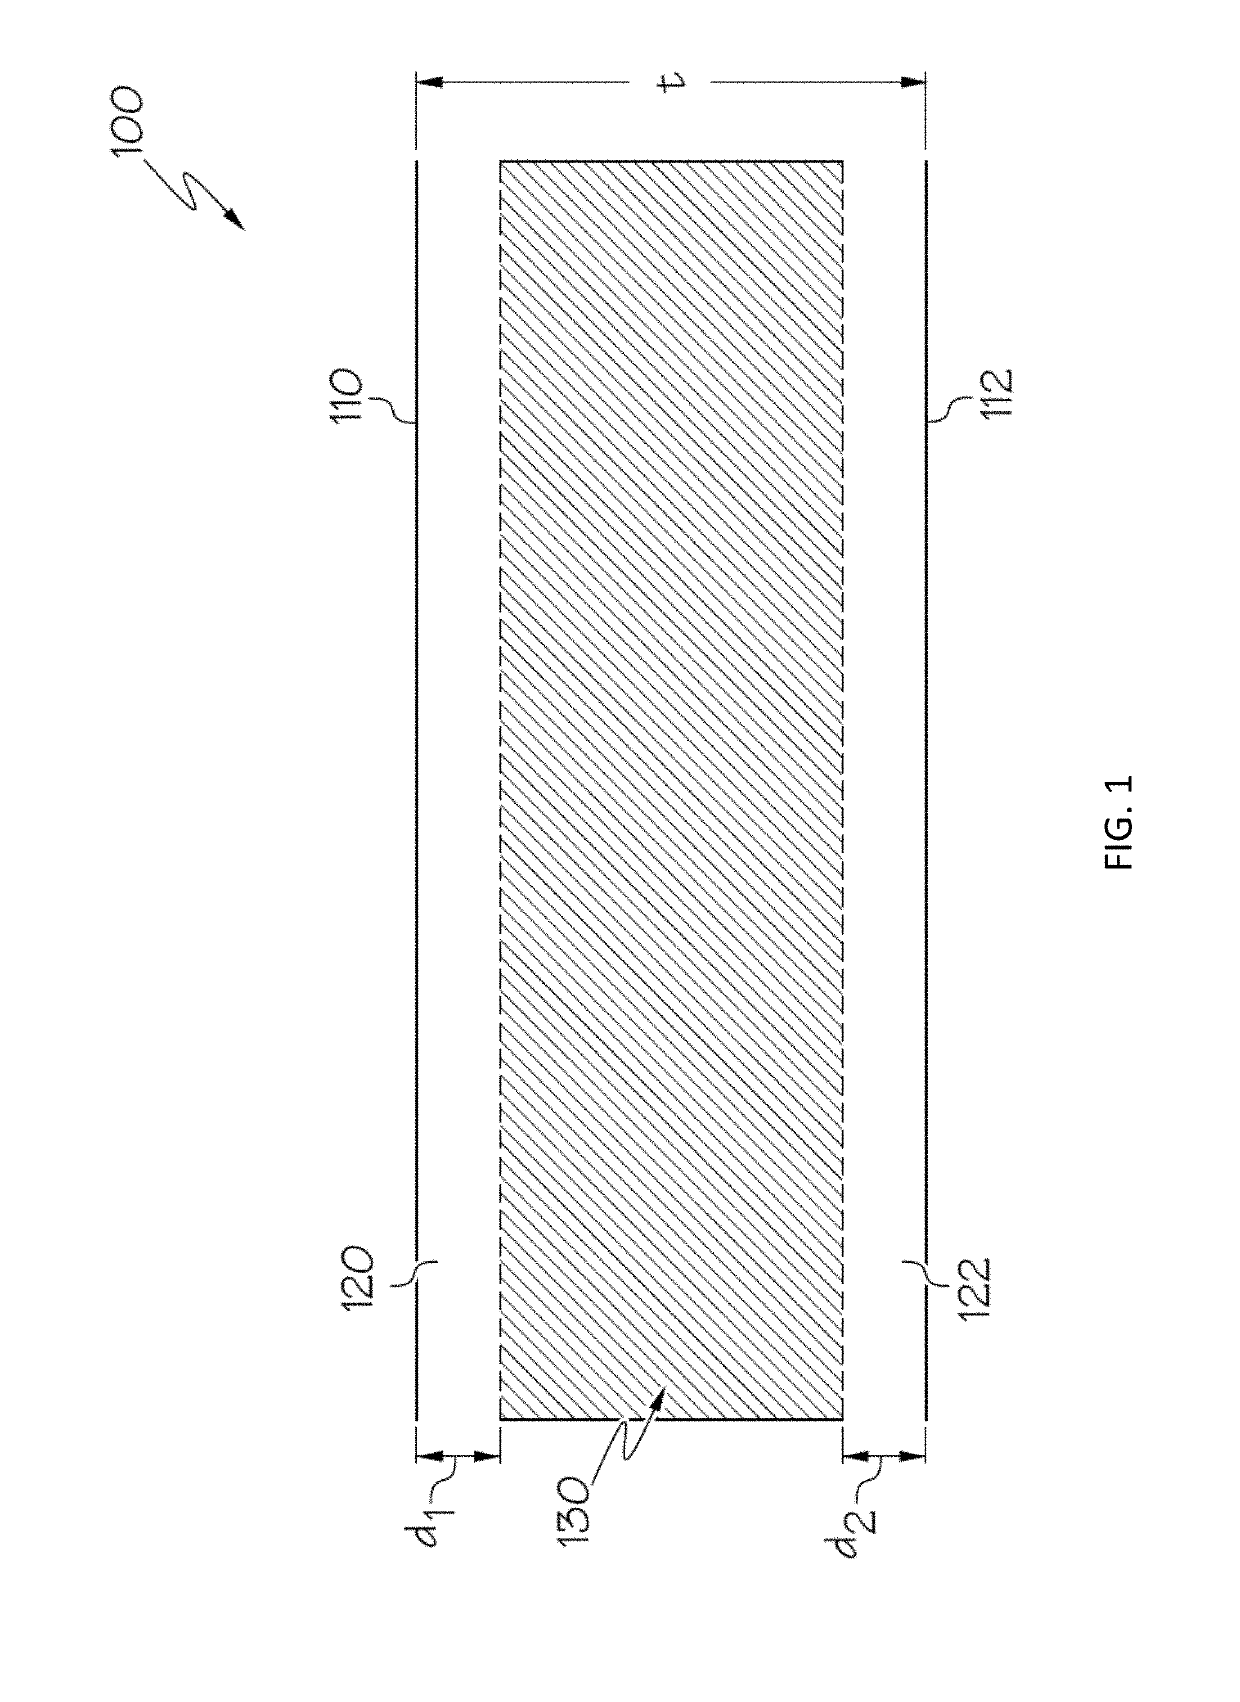 Water-containing glass-based articles with high indentation cracking threshold